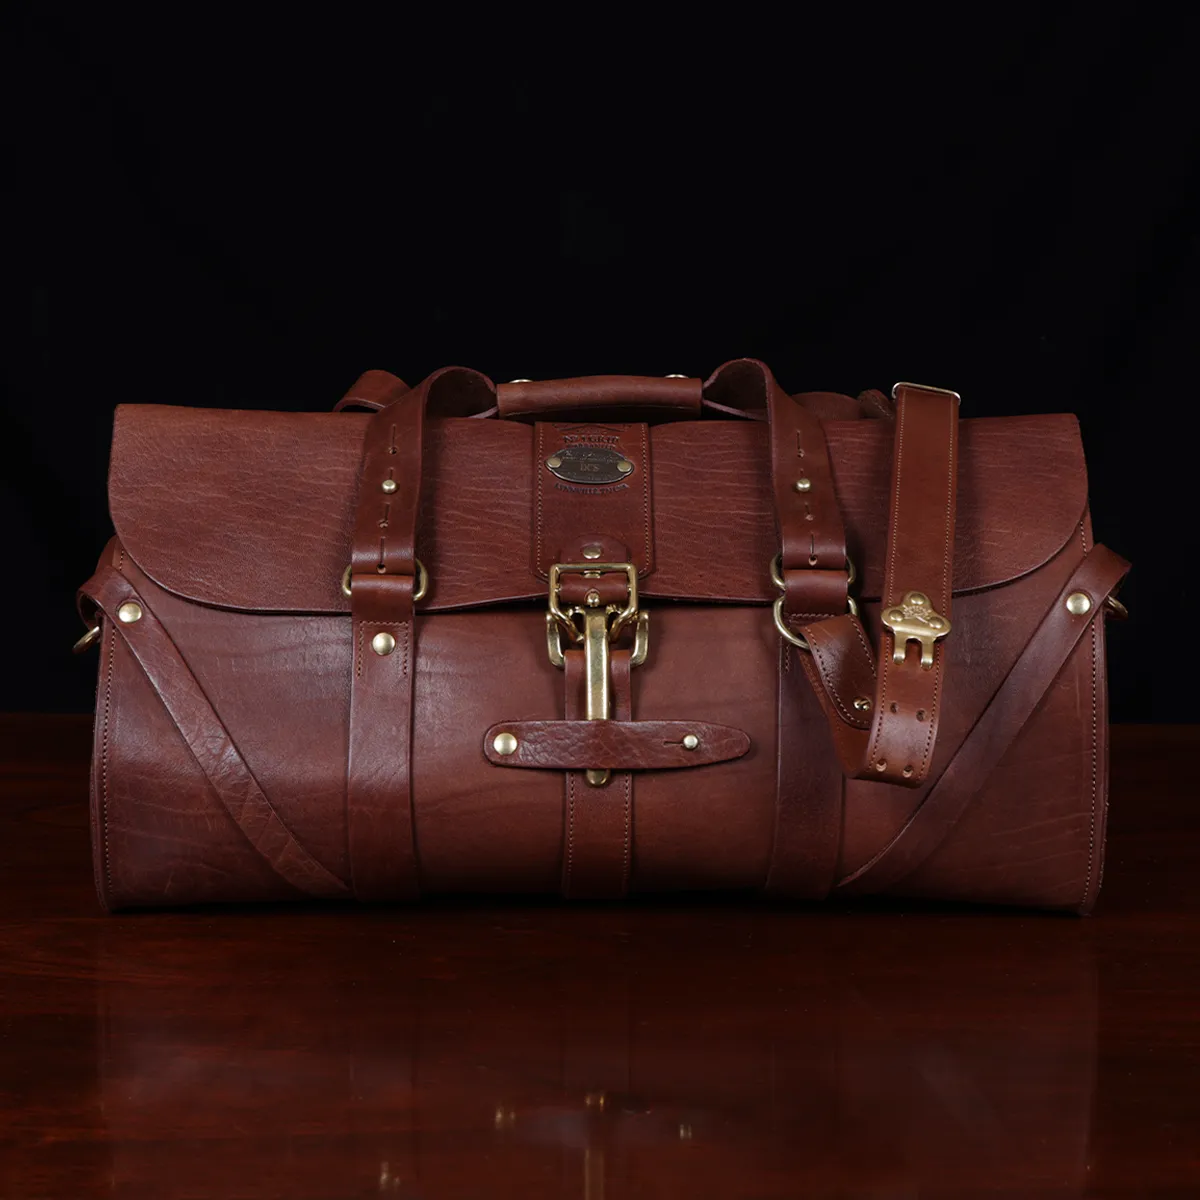 Full-Grain Leather Duffle for Weekend Travel, No. 3 Grip, USA Made